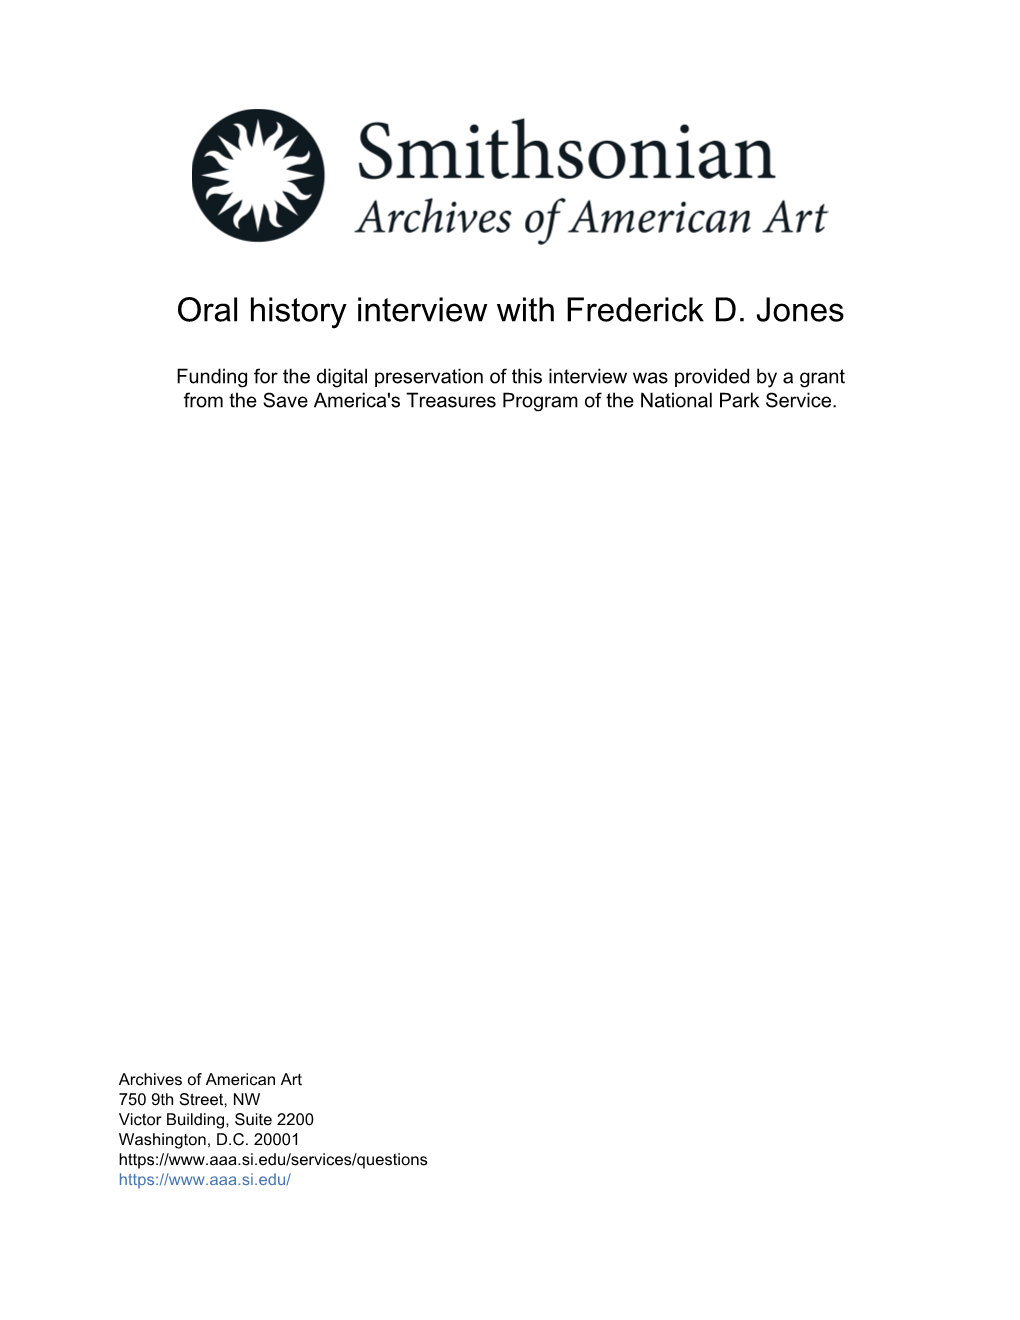 Oral History Interview with Frederick D. Jones